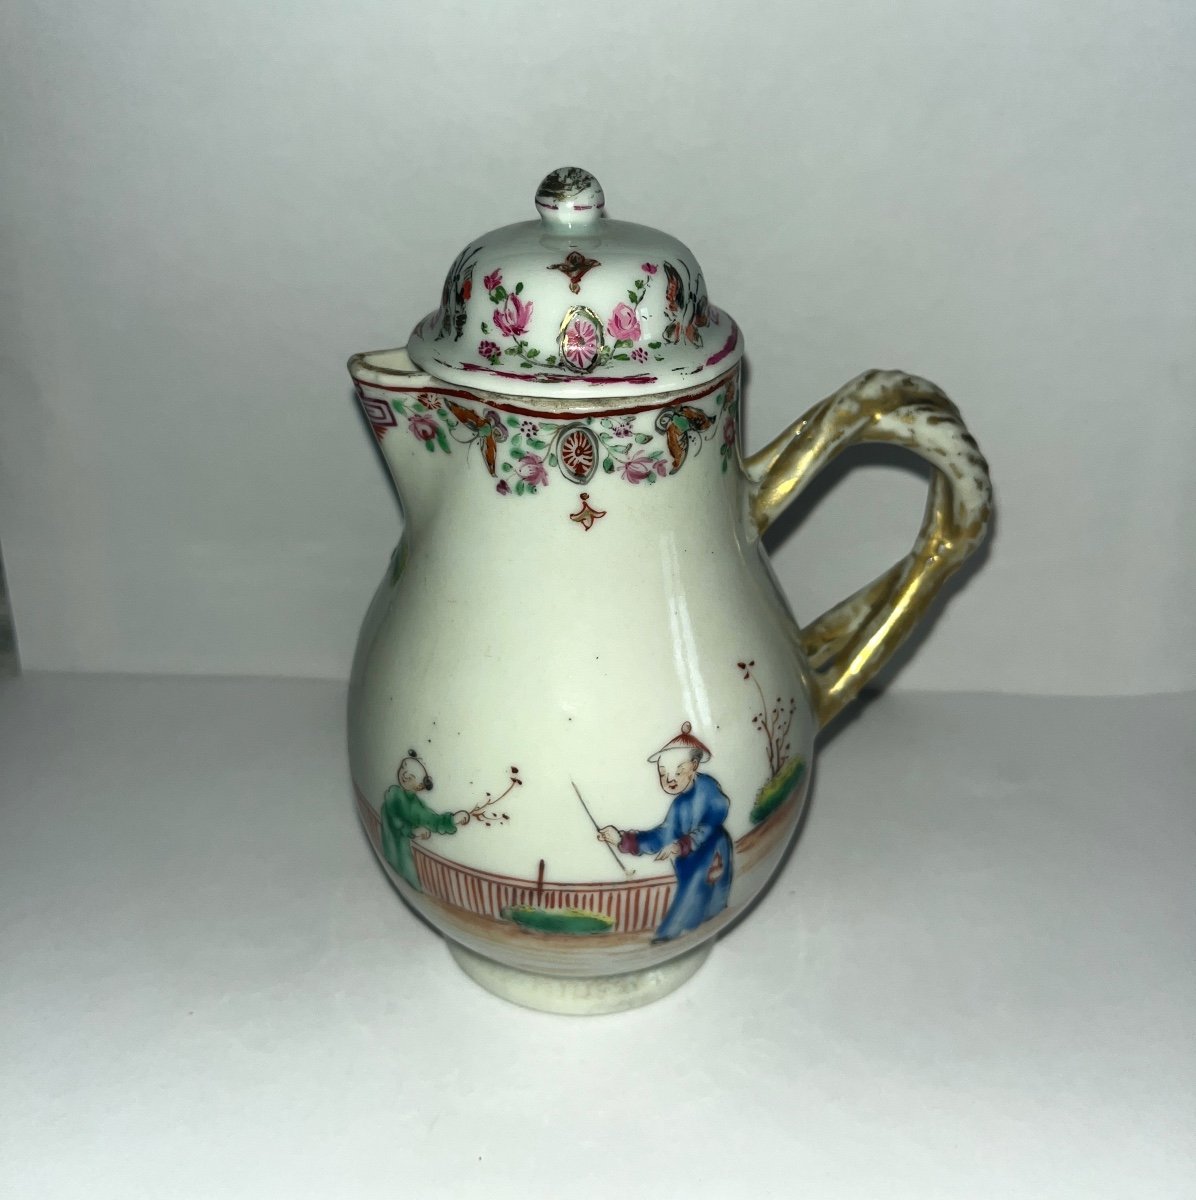 Creamer Compagnie Des Indes  With Chinese Decor From The End Of 17th Century, Beginning Of The 18th Century